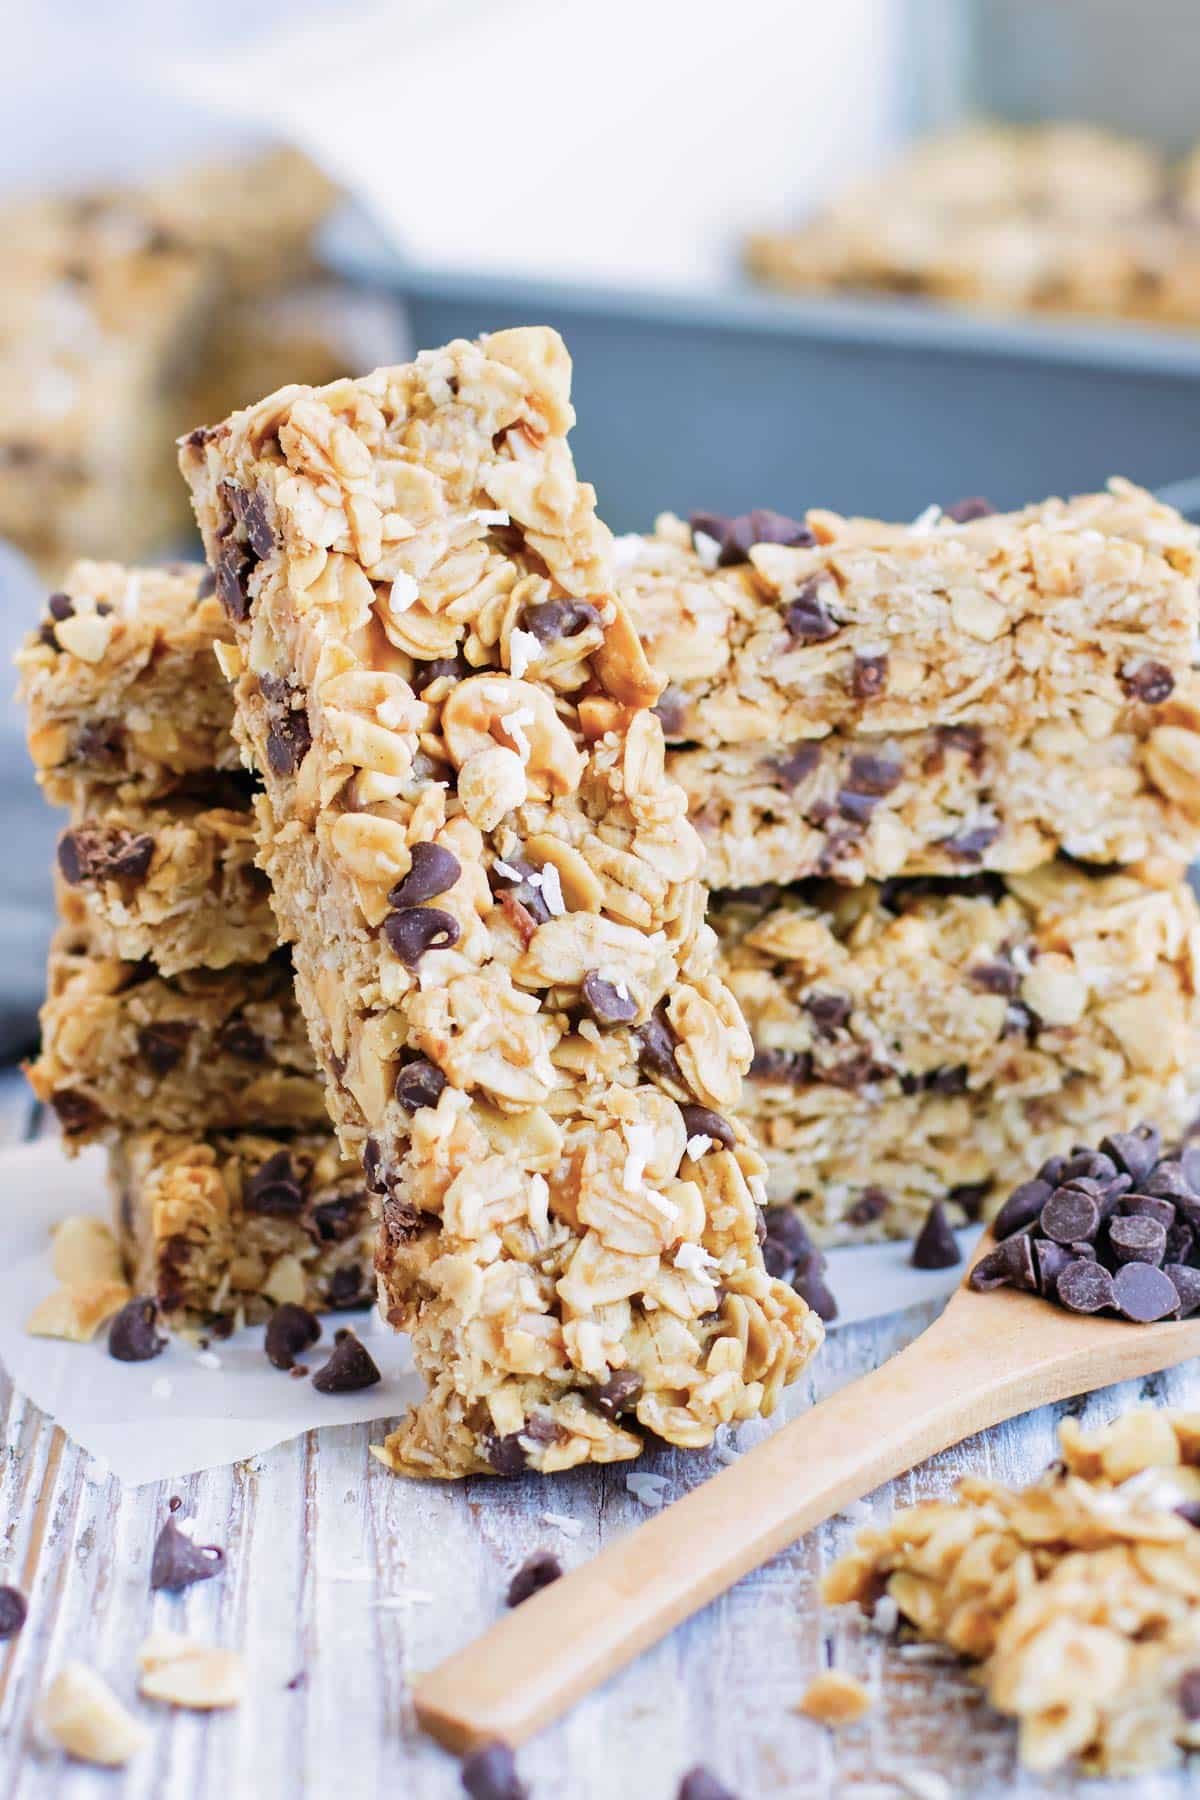 A stack of gluten-free peanut butter granola bars on parchment paper.